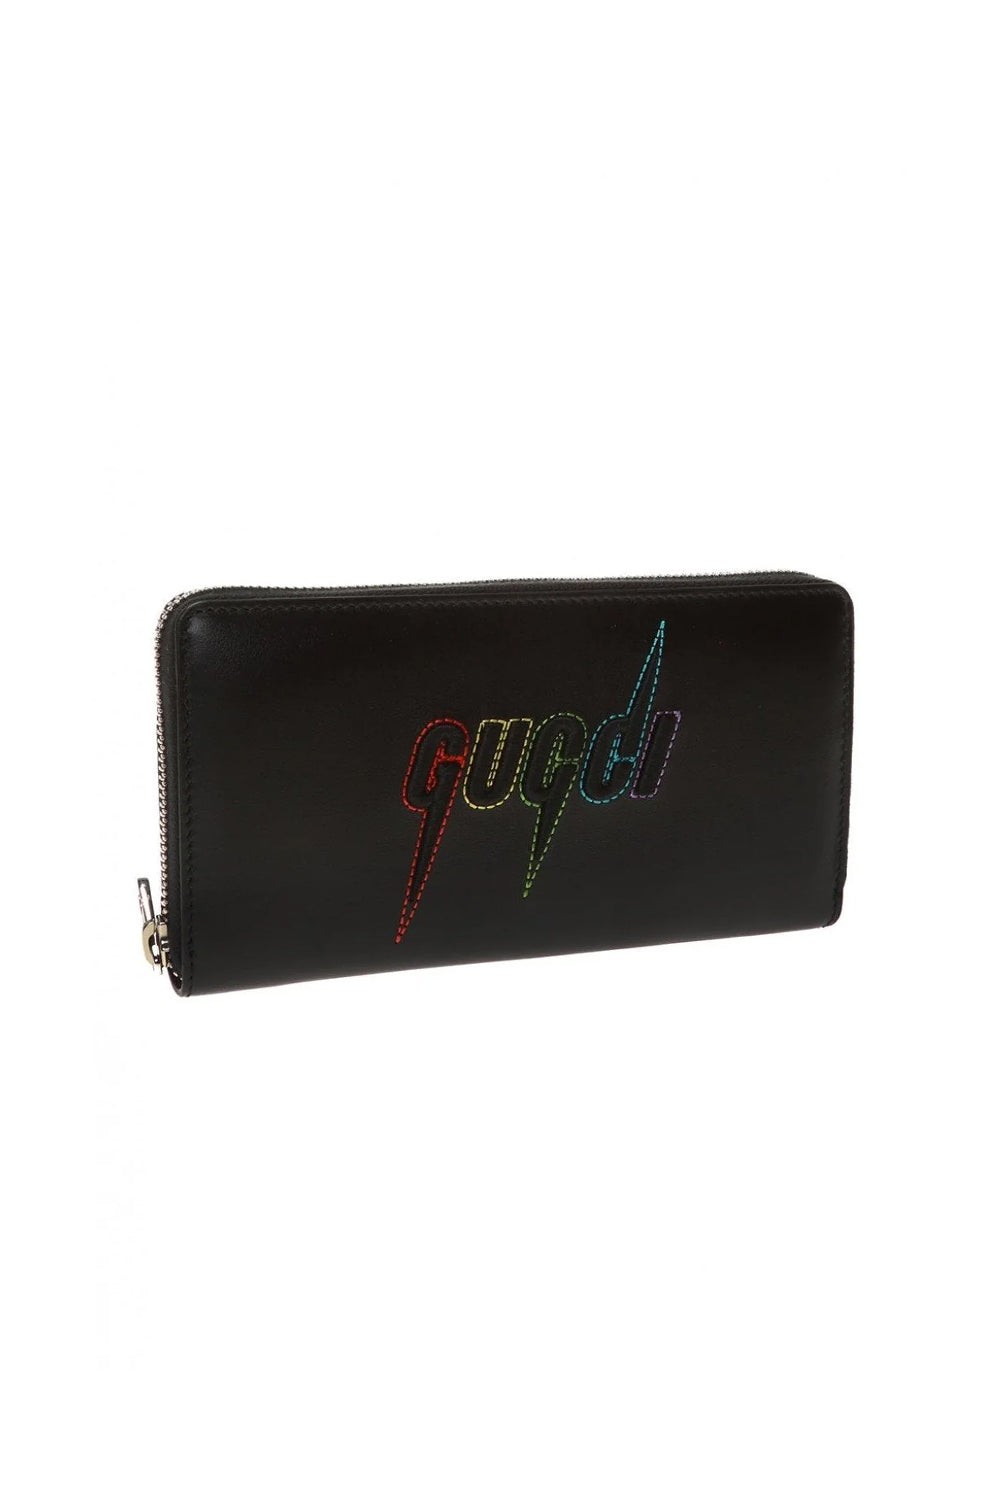 Gucci Leather Rainbow Blade Lightning Wallet